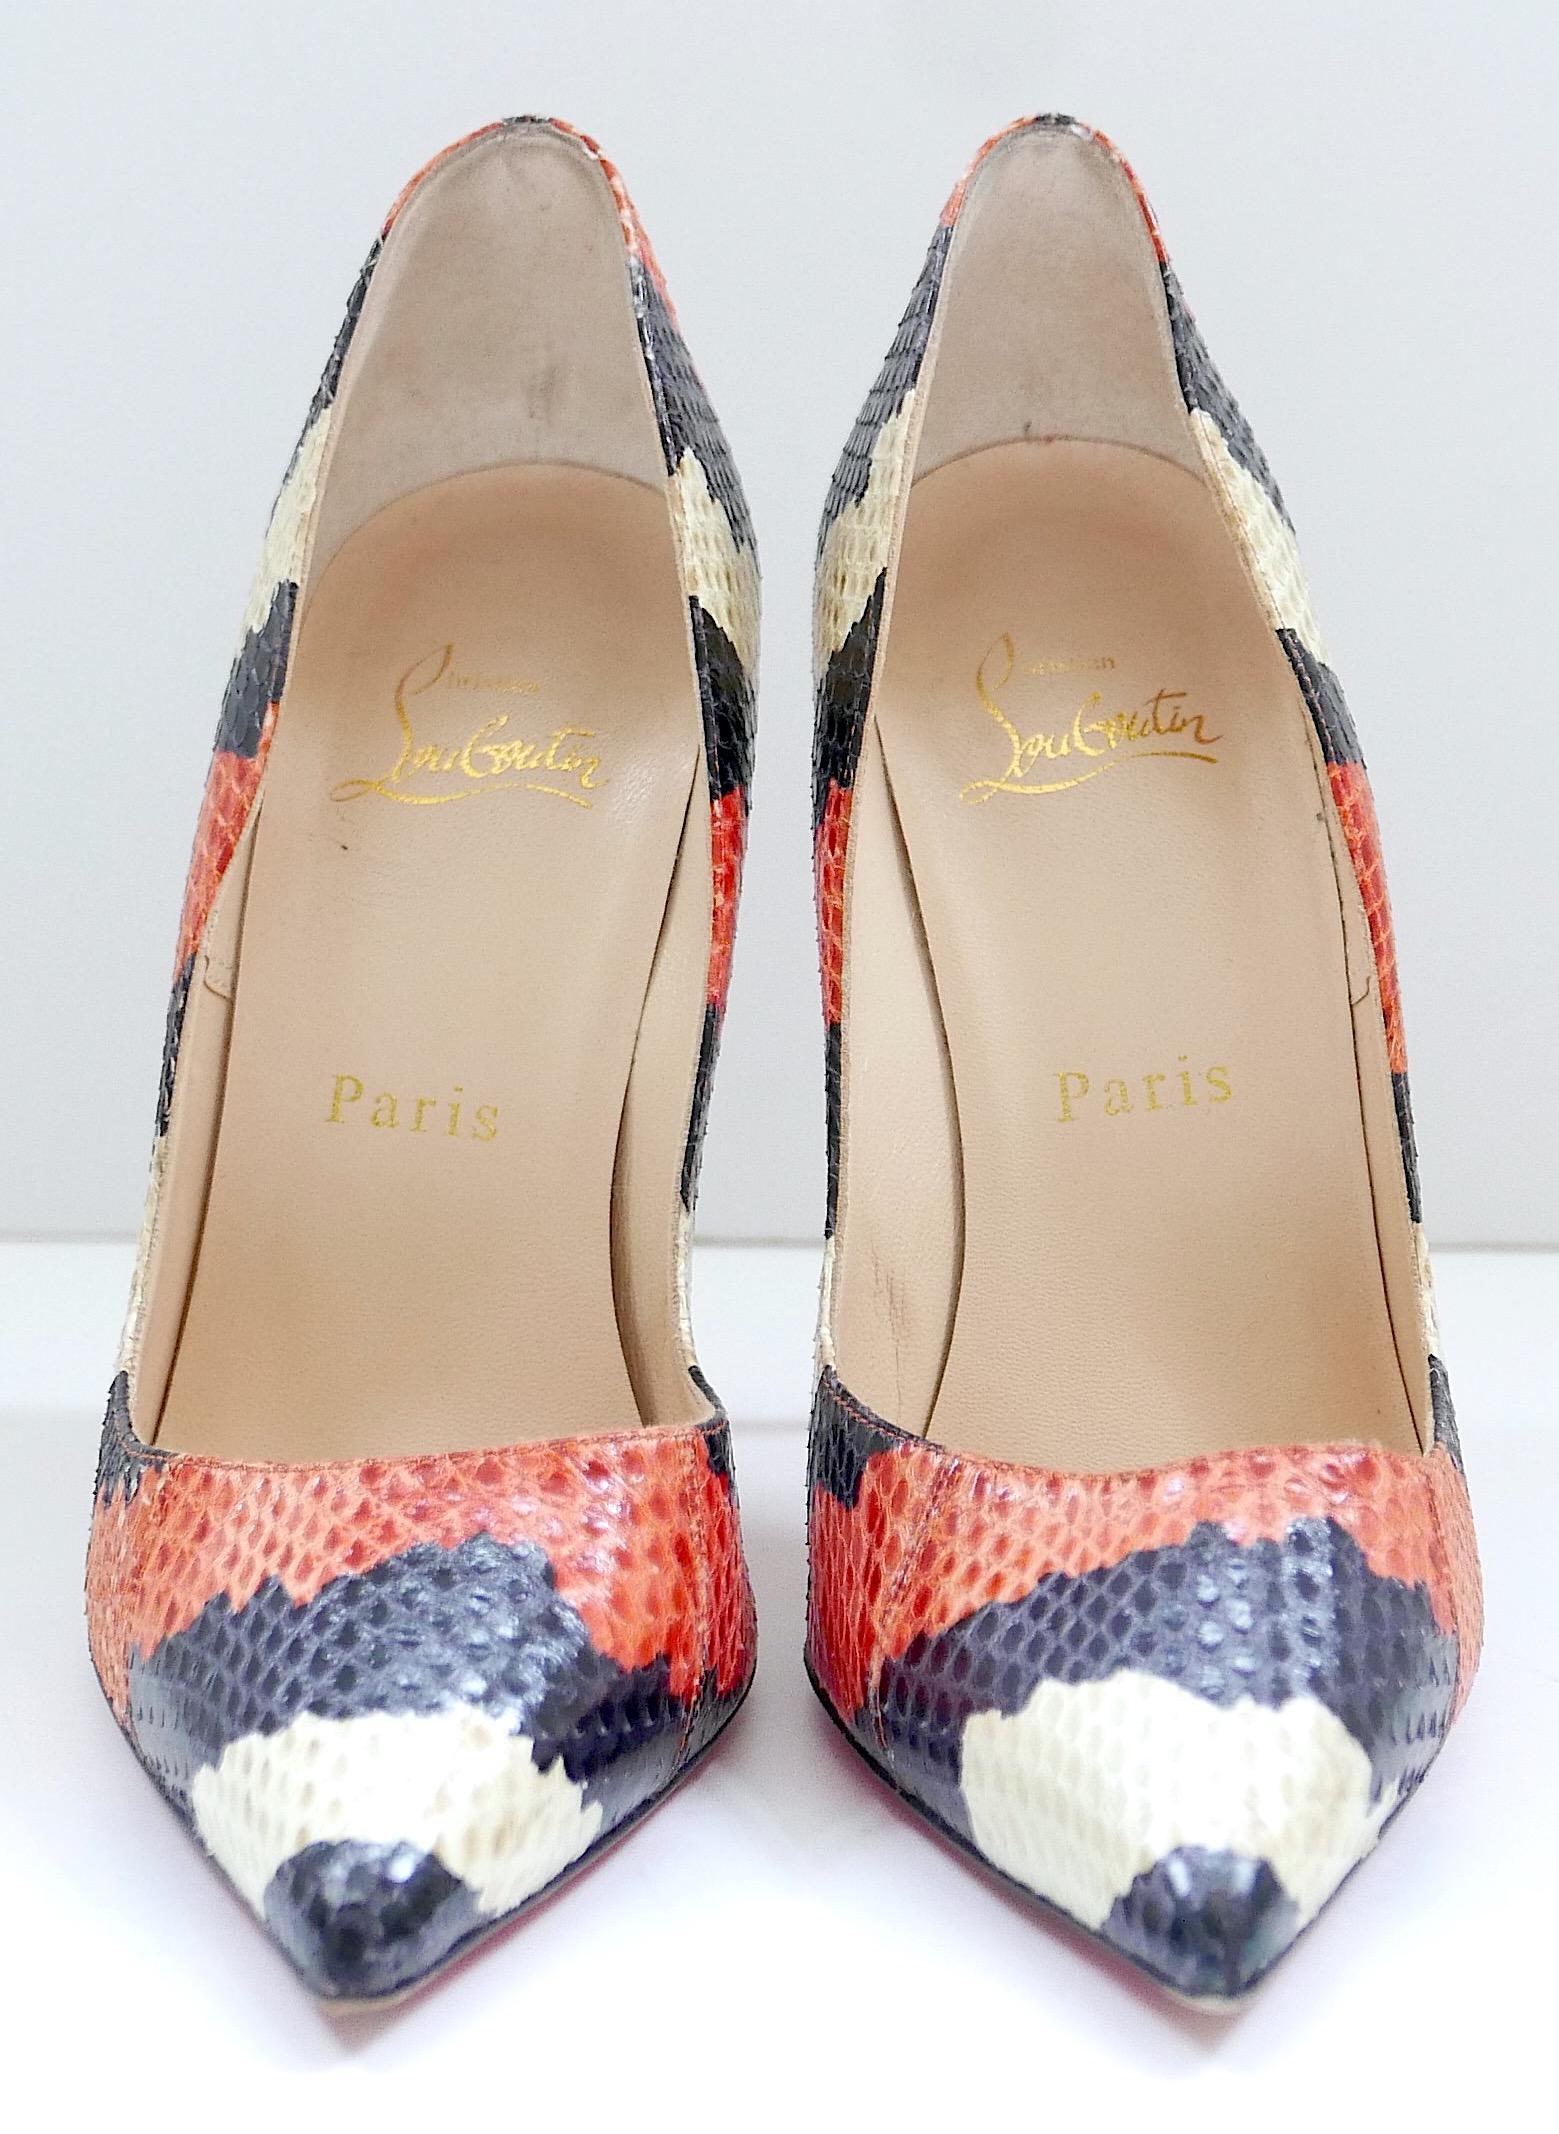 These are beautiful Christian Louboutin So Kate heels made of striped snakeskin. They have been worn once and come with one dustbag. Made from orange, beige, and black snakeskin, they feature pointed toes, stiletto heels, and the signature red